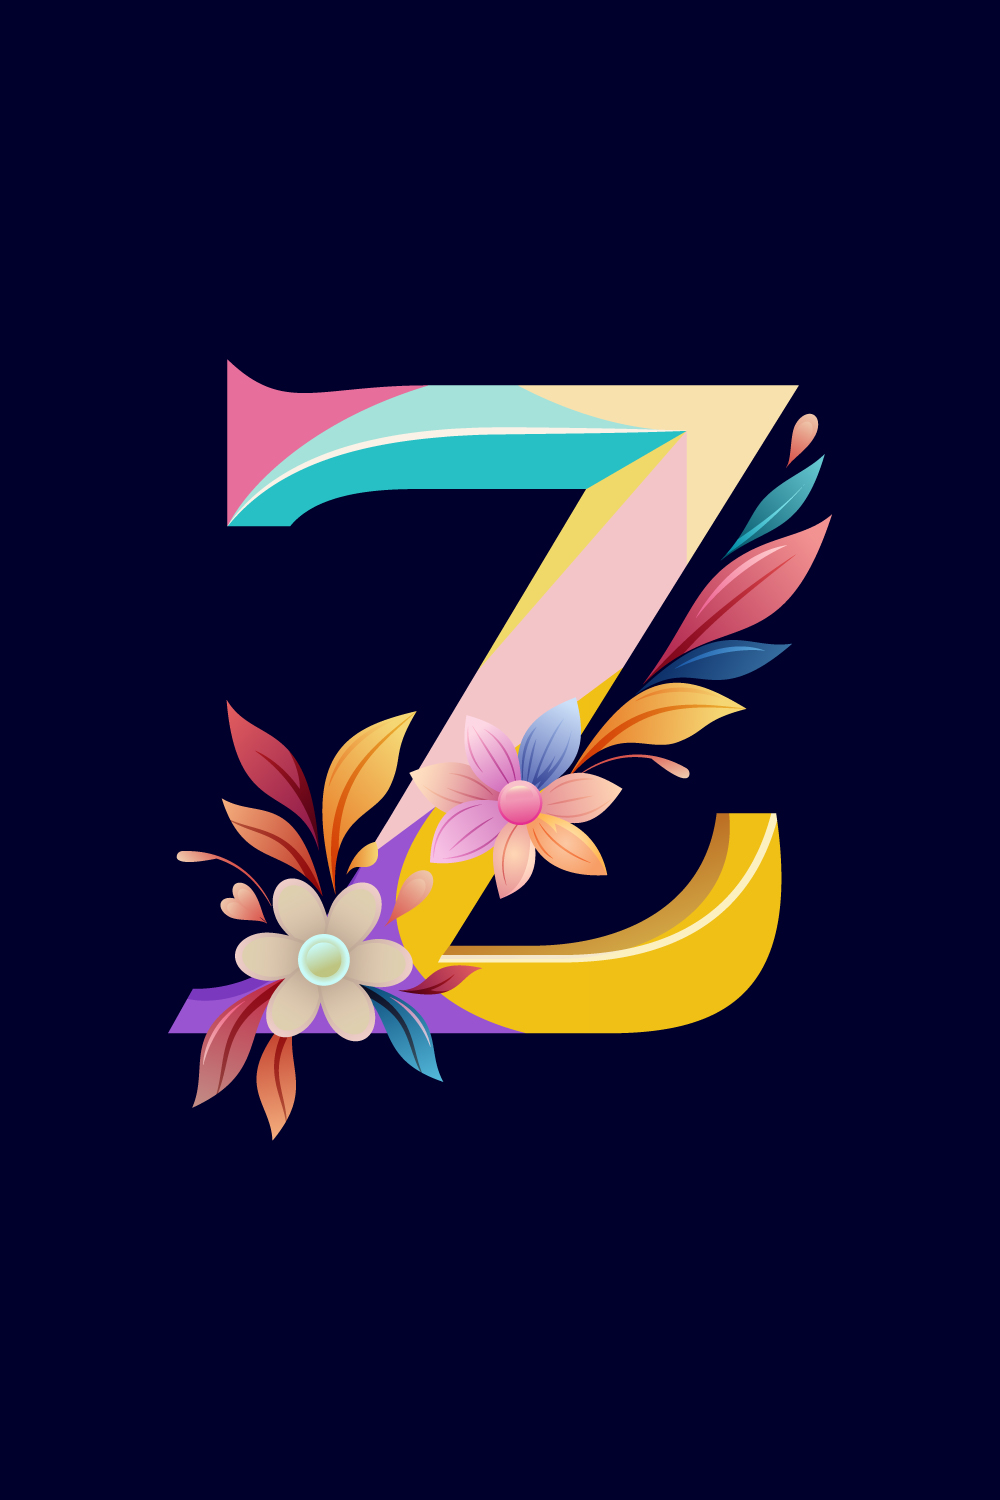 Floral alphabet Z Logo for wedding invitations, greeting card, birthday, logo, poster other ideas pinterest preview image.